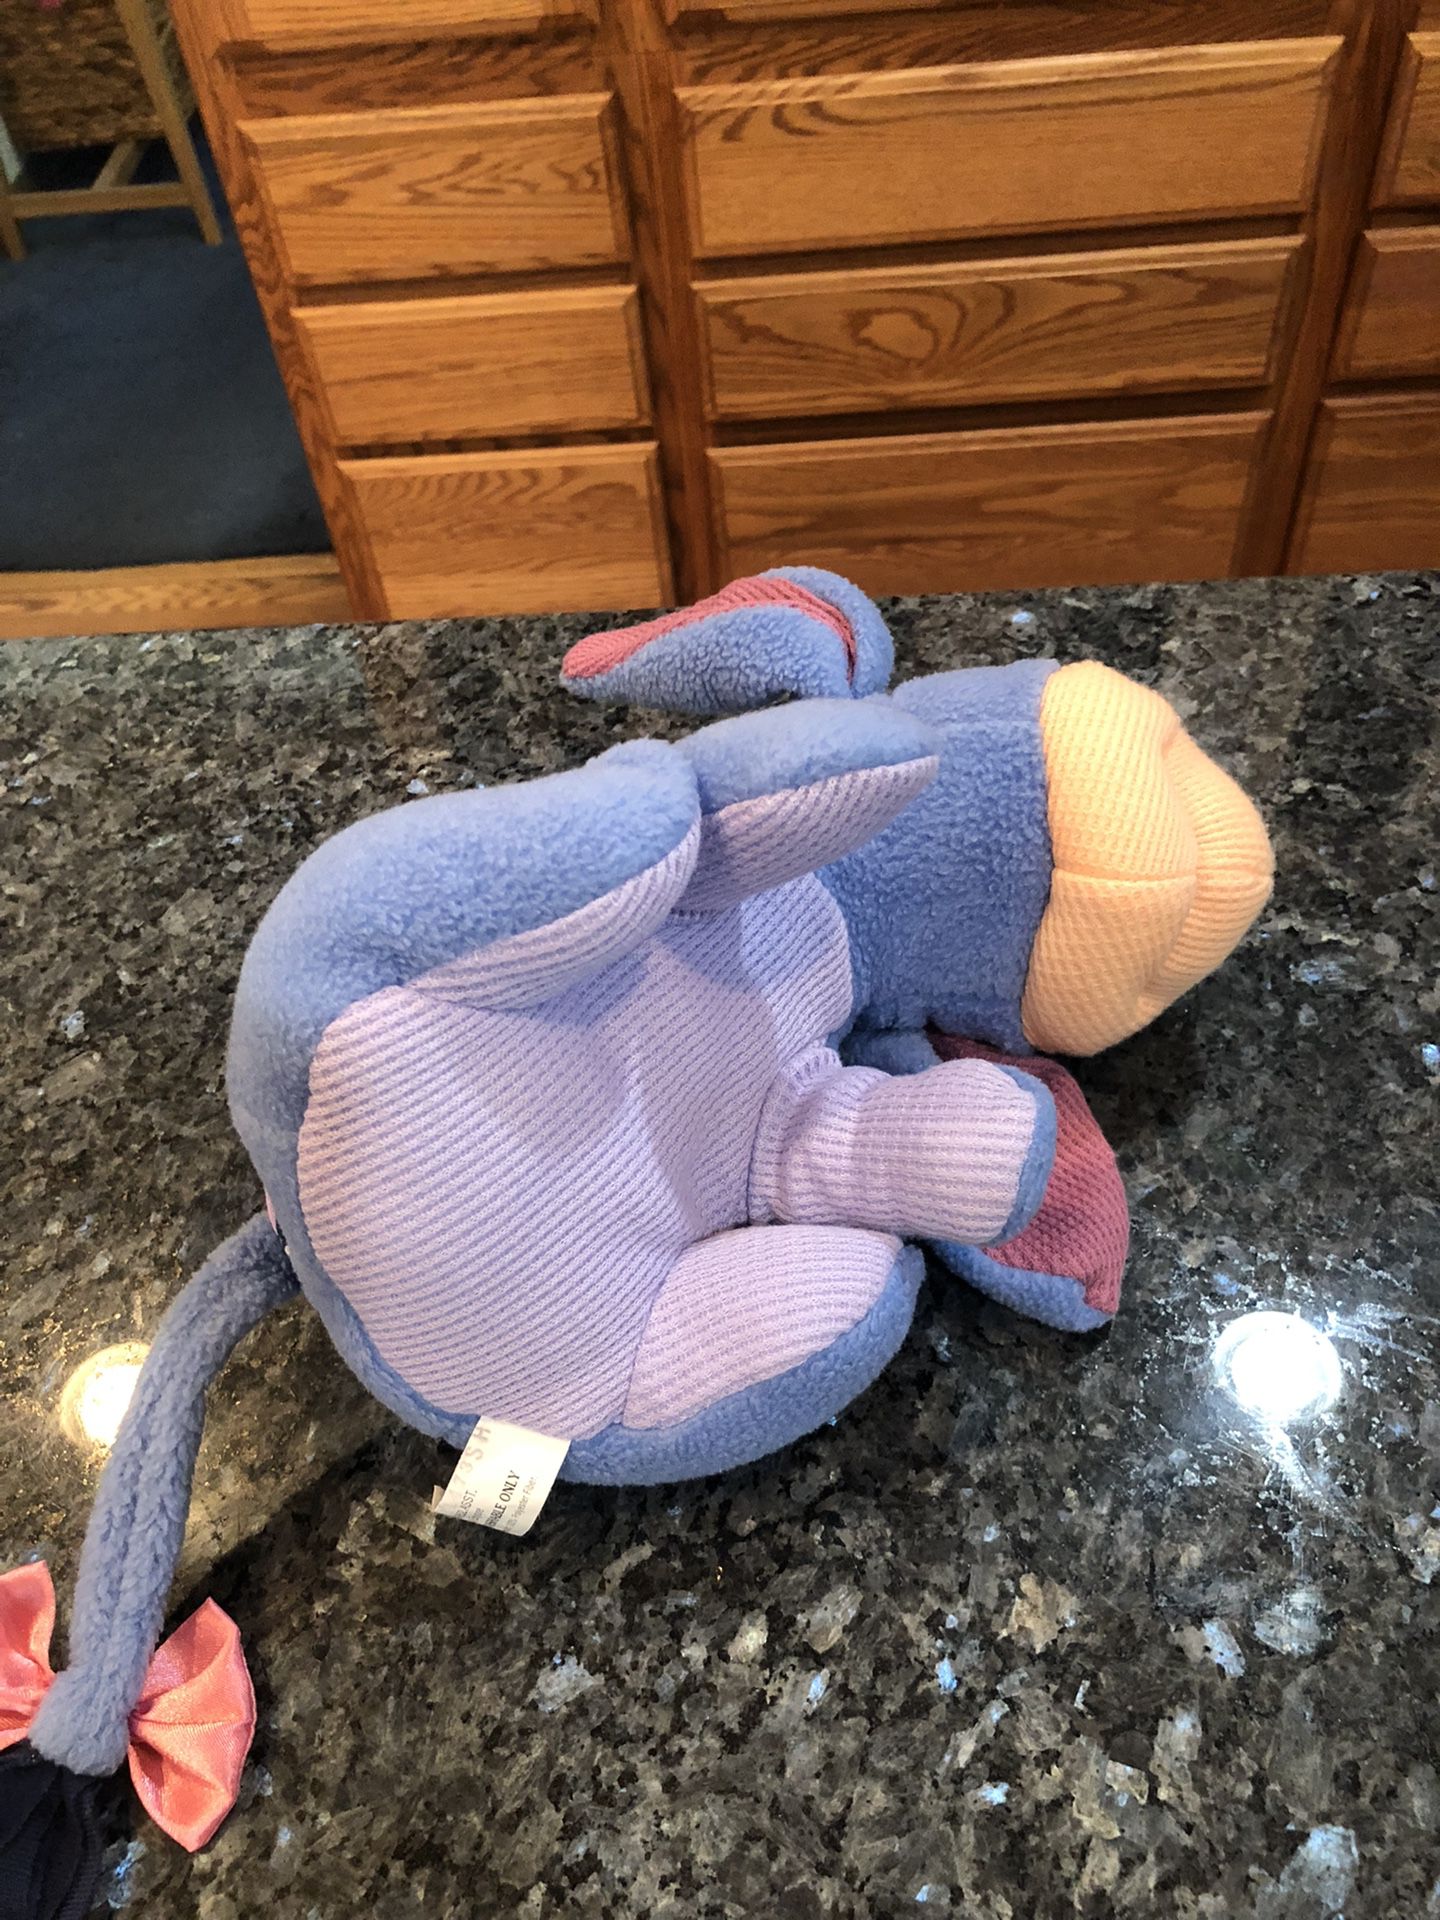 Rare Vintage 2001 Disney Fisher Price Baby Rattle Eeyore Stuffed Toy .  Size 10 inches Wide .  Preowned Excellent Condition 